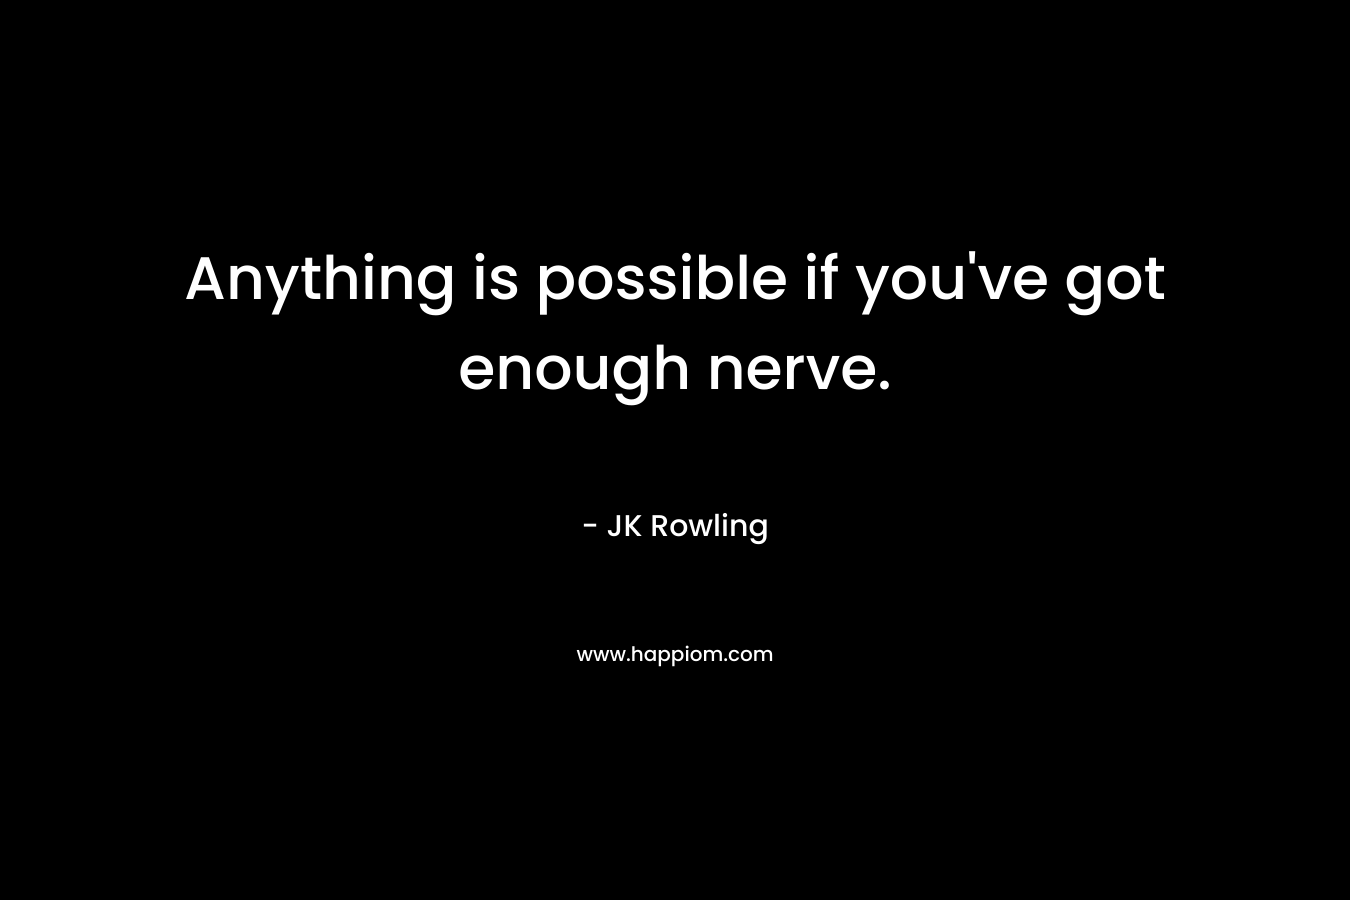 Anything is possible if you’ve got enough nerve. – JK Rowling